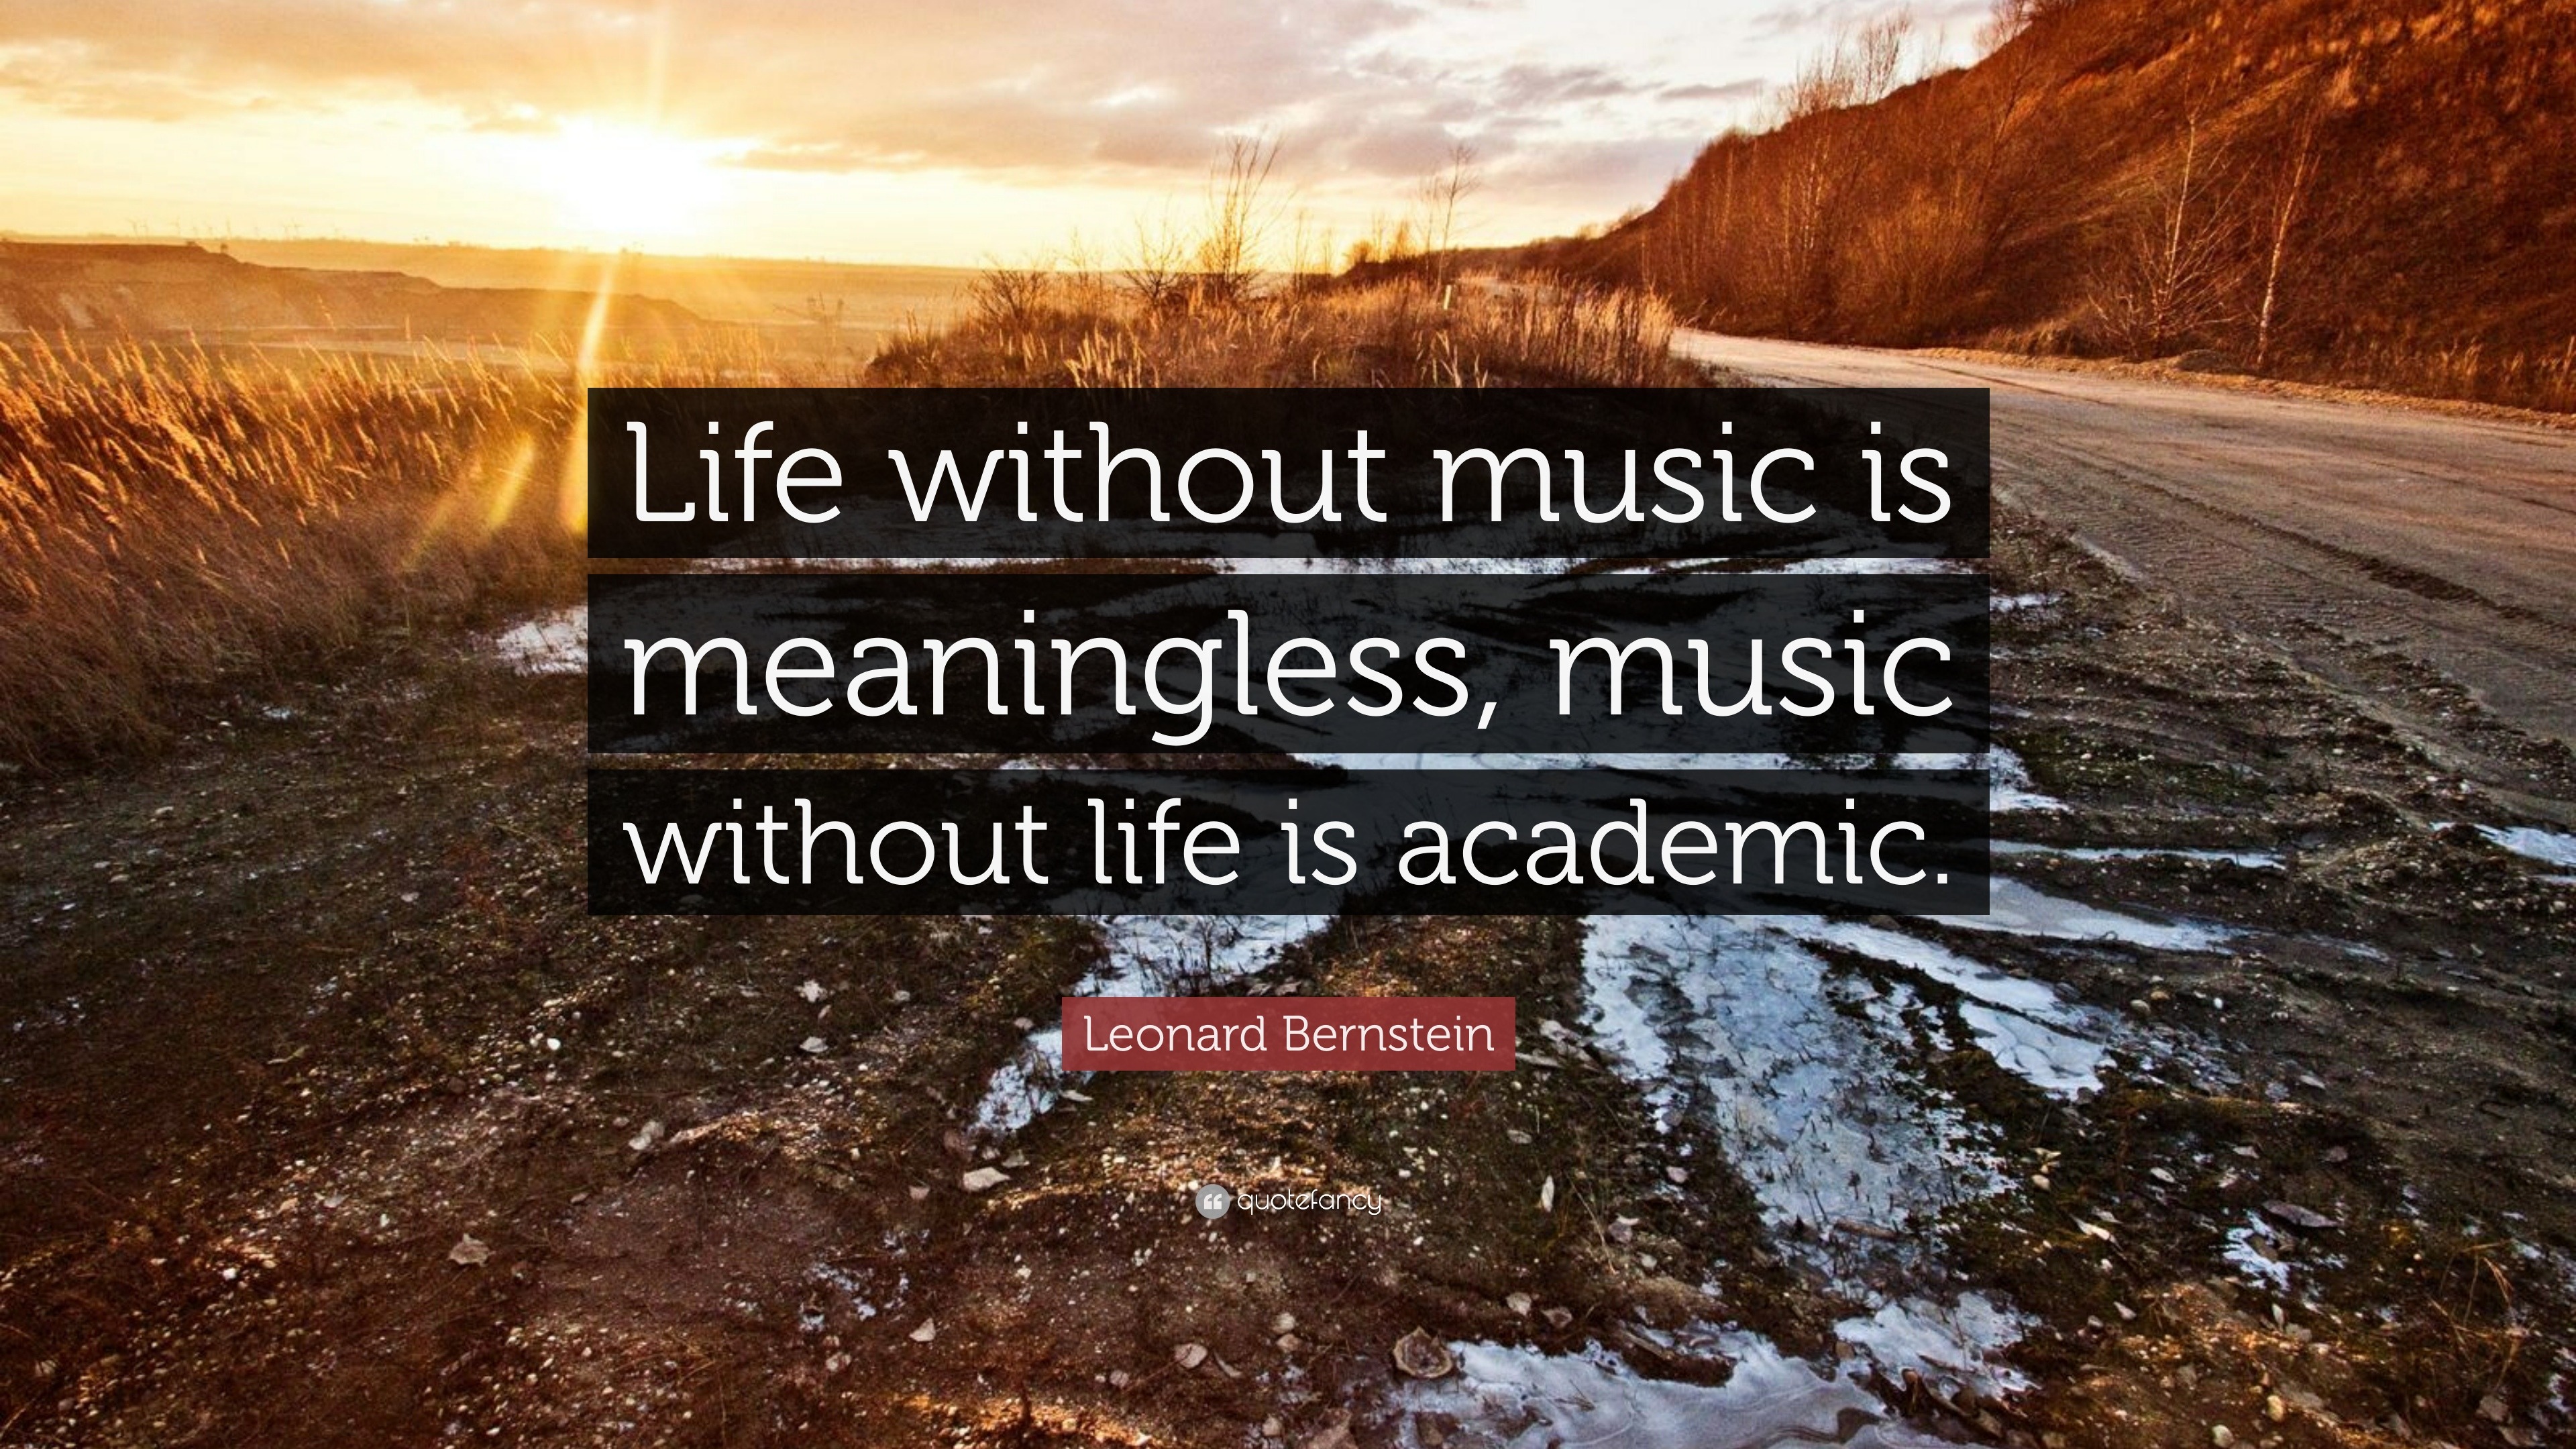 Leonard Bernstein Quote “Life without music is meaningless music without life is academic